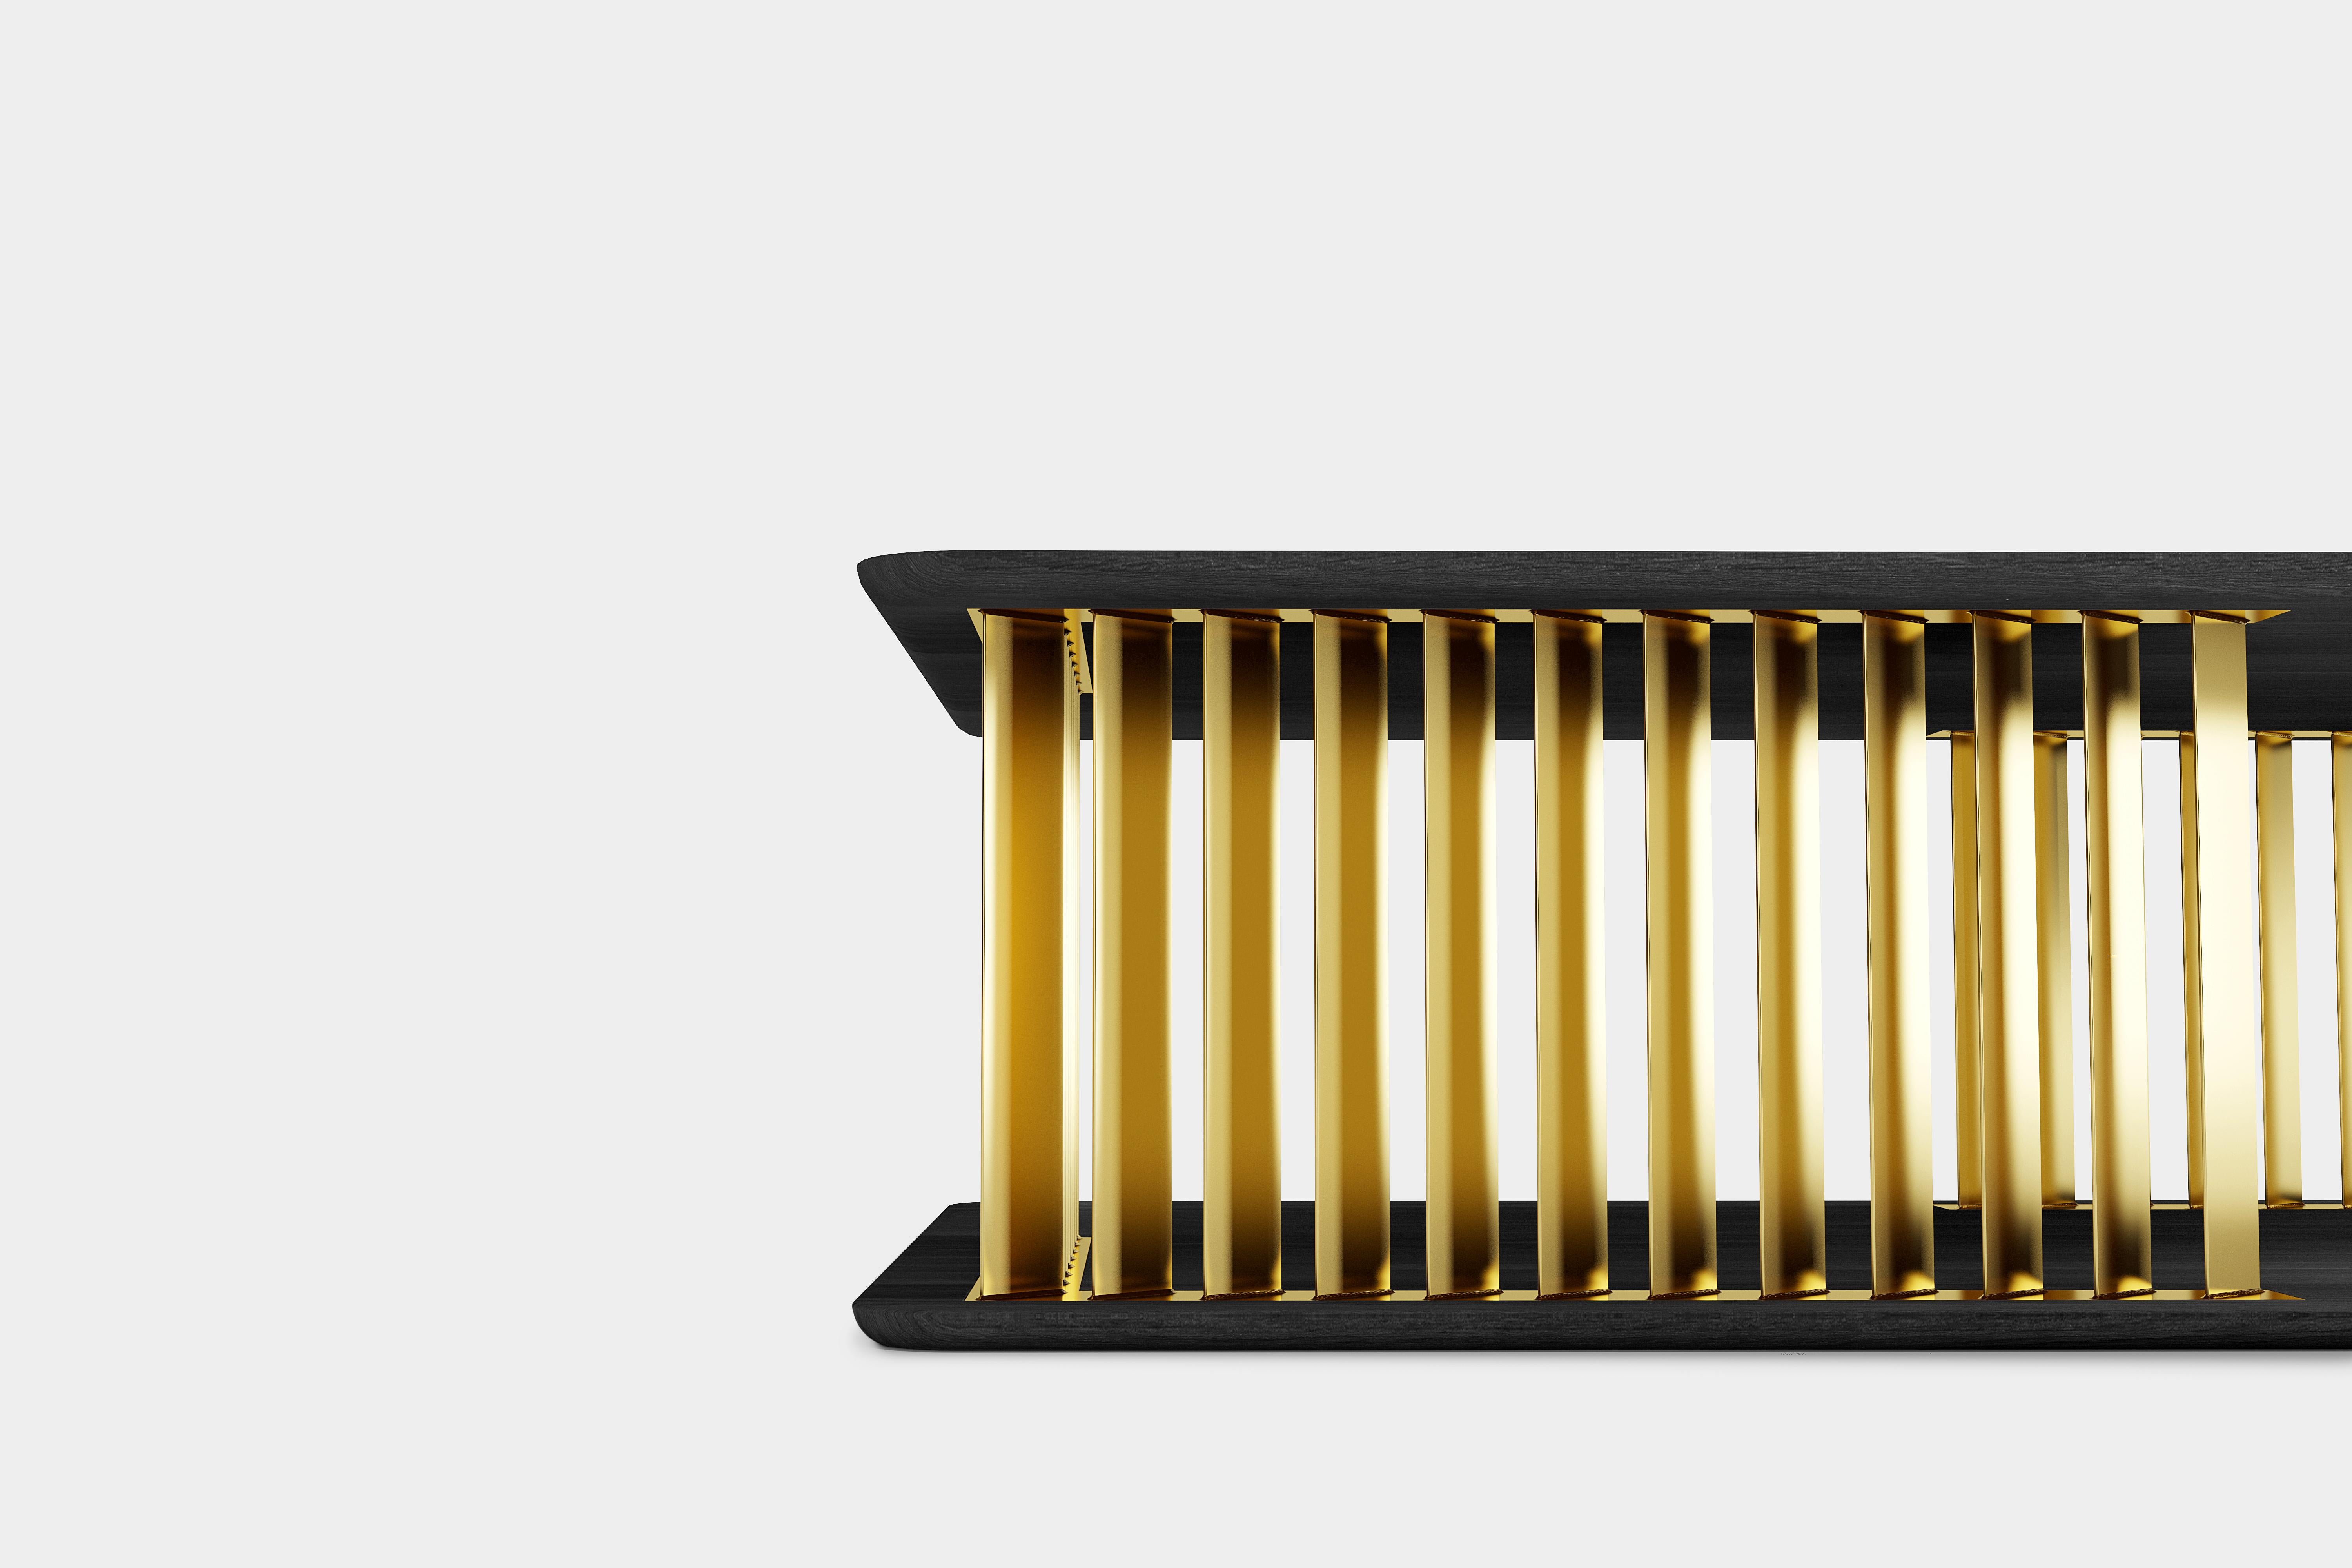 Plateau Rectangular Coffee Table in Black Wood and Brass Structure by NONO

Inspired by the majesty of mountain systems throughout the Americas, Plateau makes reference to the small surfaces that emerge from a vast piece of land peculiar for its